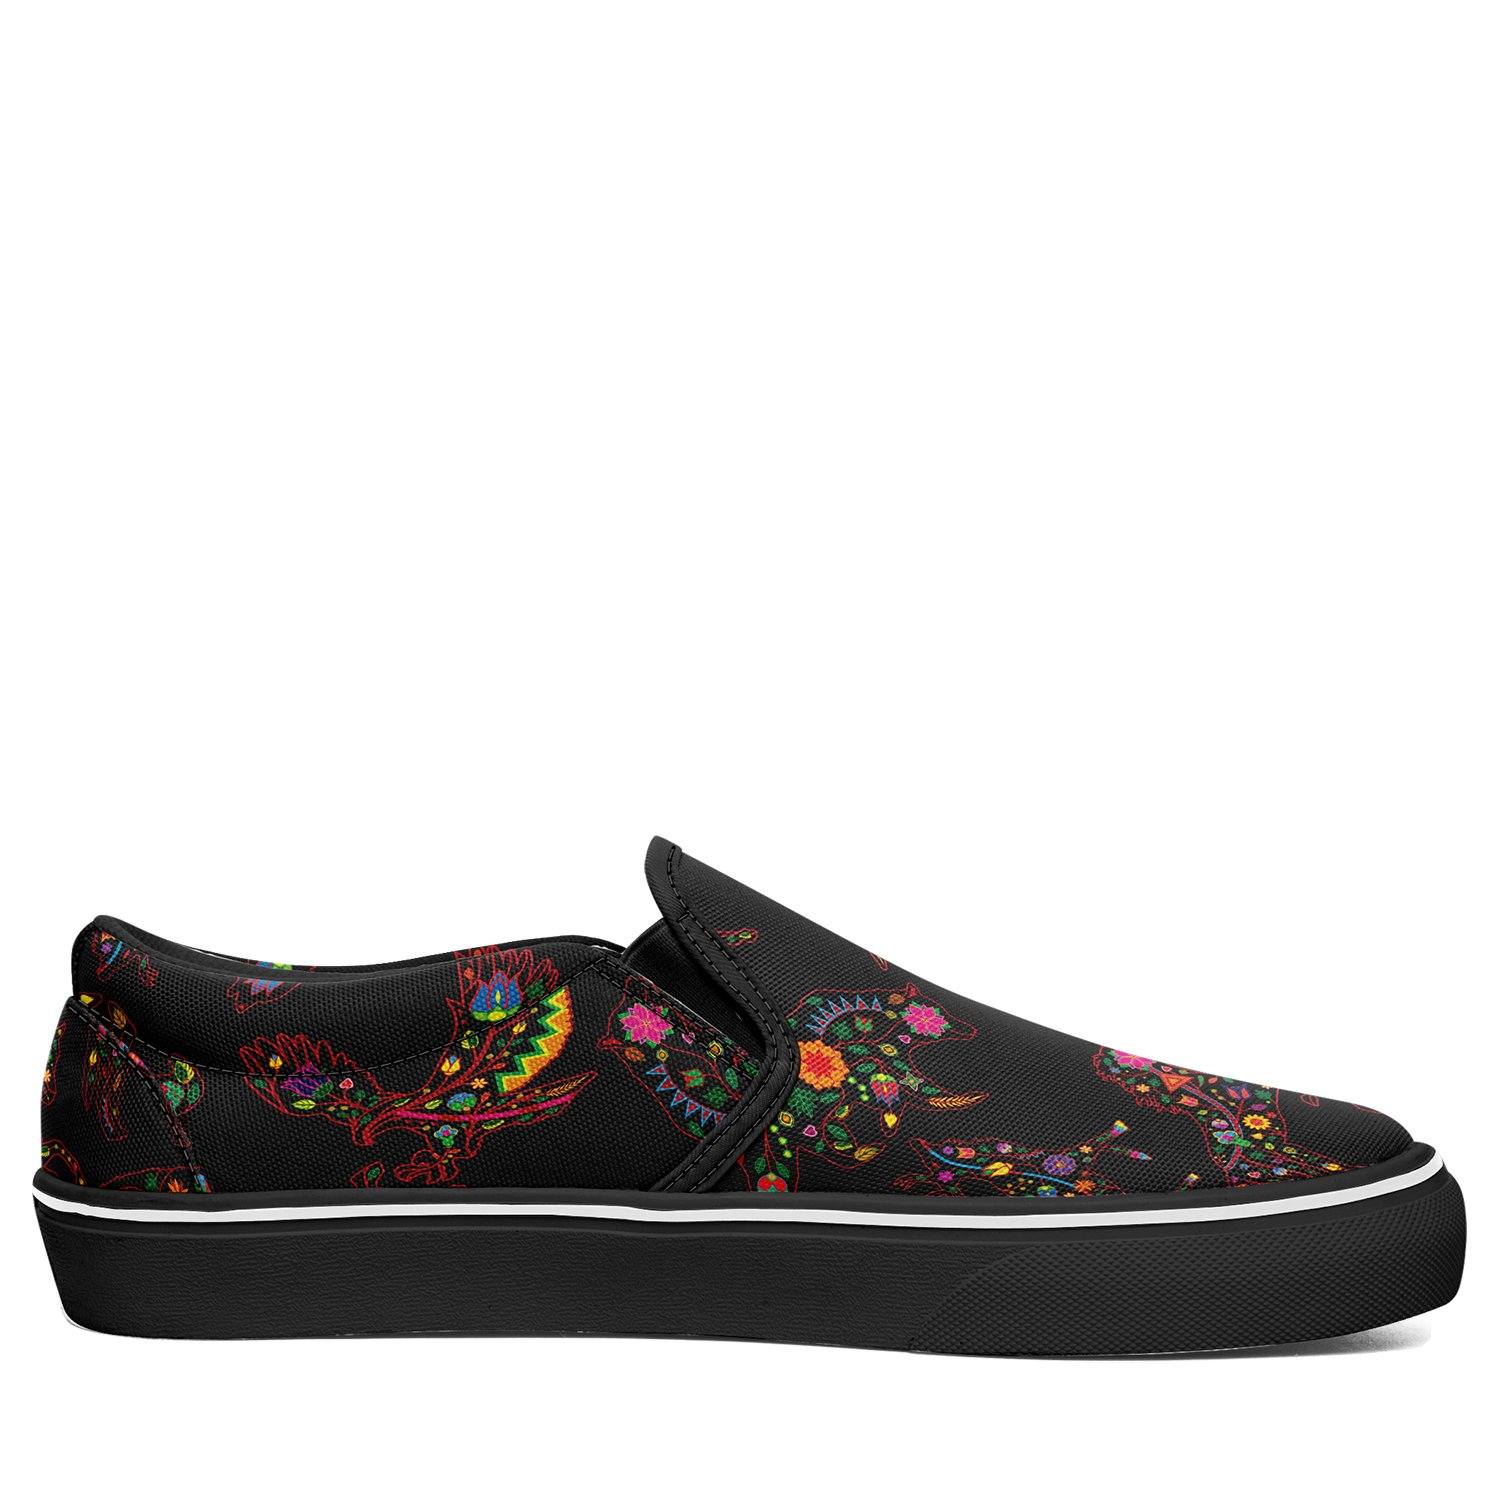 Floral Animals Otoyimm Kid's Canvas Slip On Shoes otoyimm Herman 